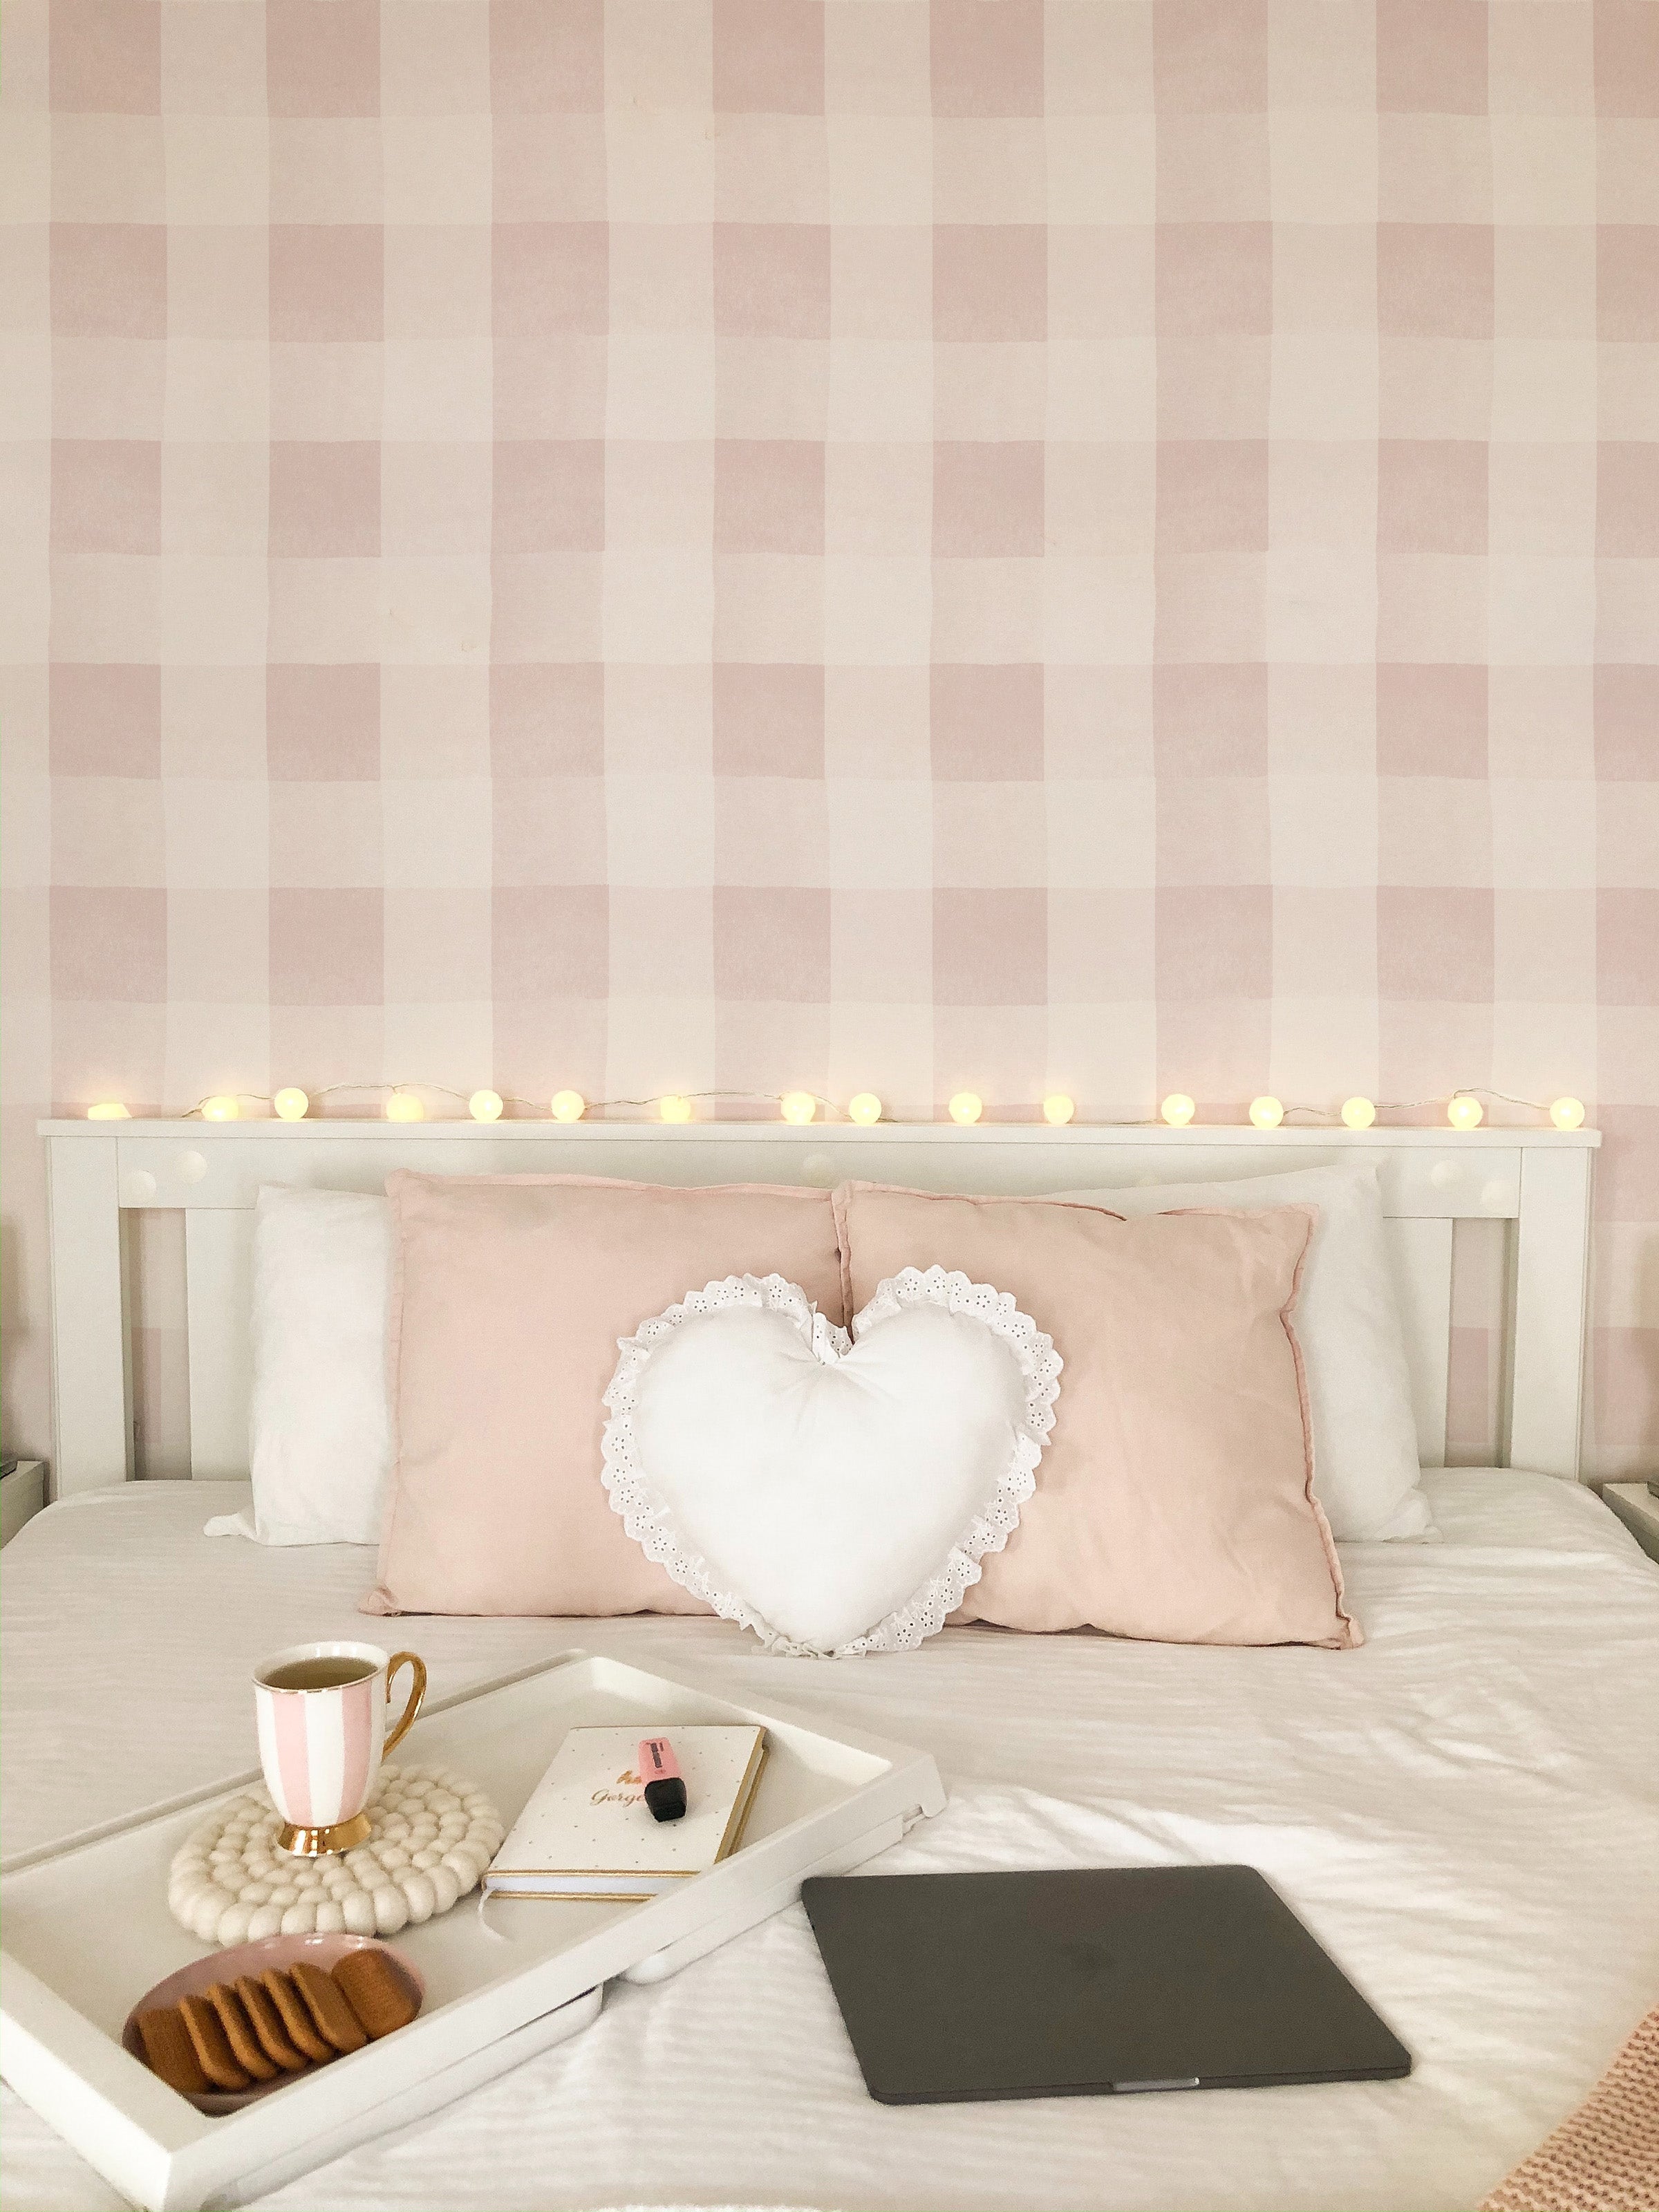 A cozy bedroom enhanced by Camille Wallpaper - Nude with its soft pink and white checkered design. The wallpaper adds a gentle, calming effect to the room, perfectly matching with the white and pink bedding and romantic decor accents, providing a tranquil retreat.